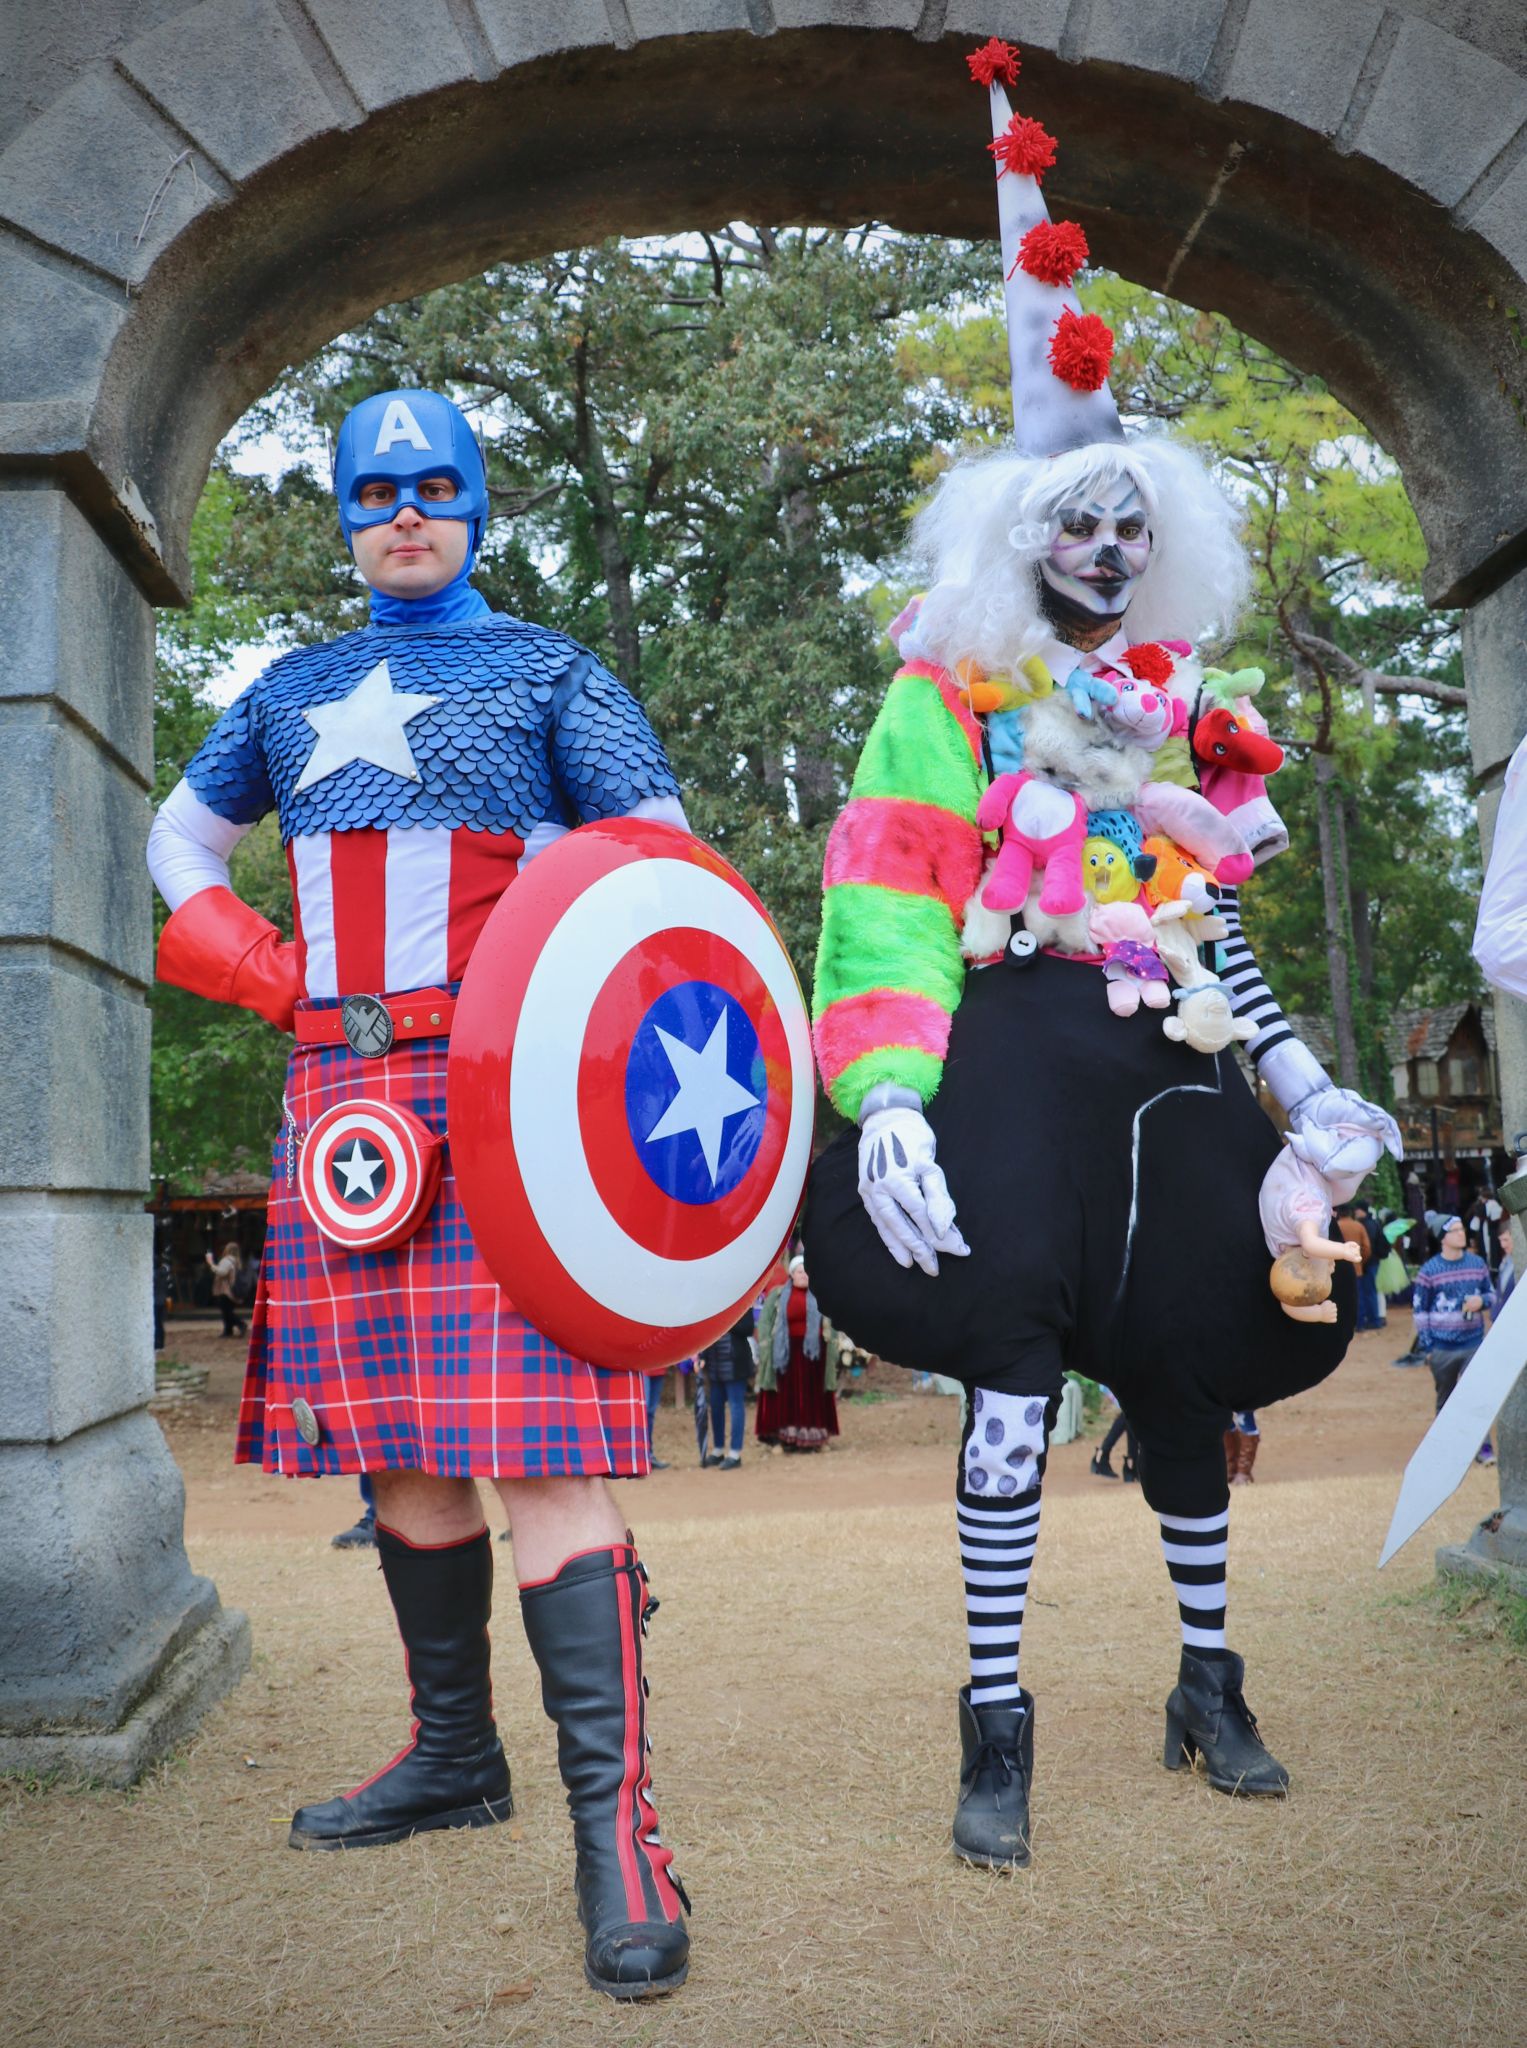 African American Cosplayers at the Texas Renaissance Festival - Mocha Man  Style